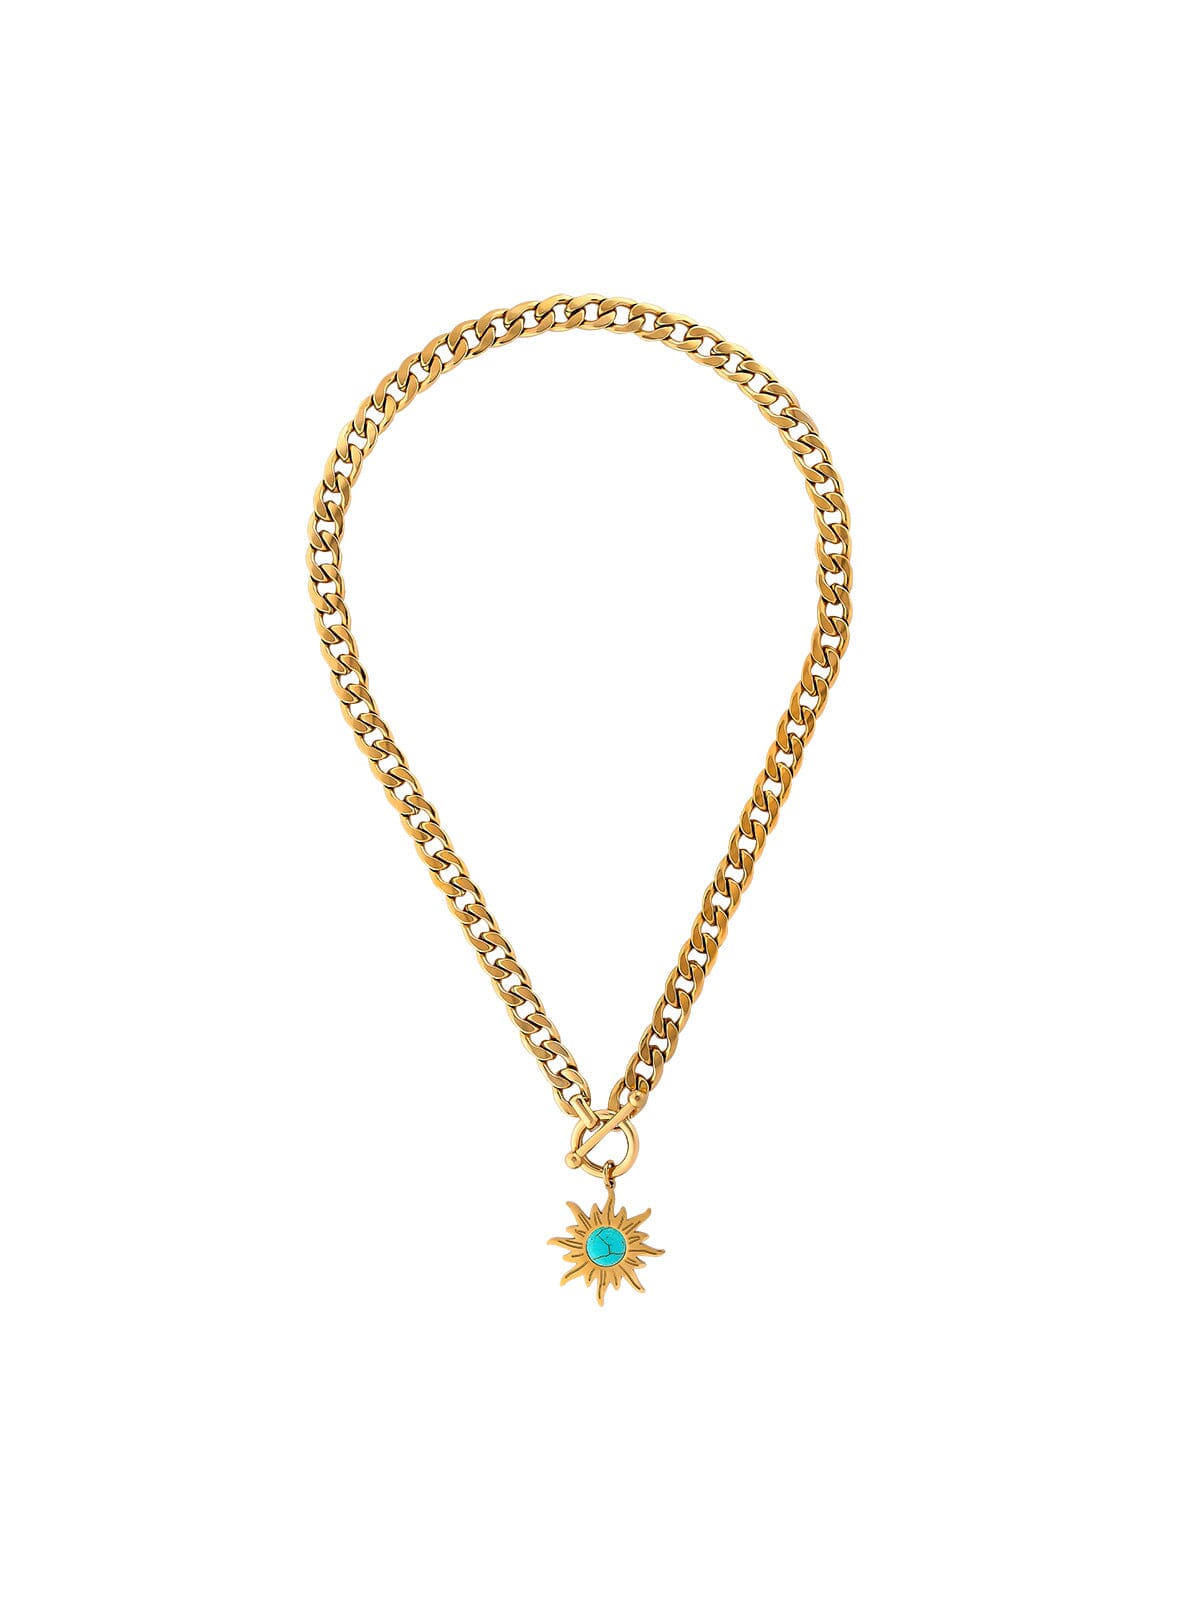 18k Gold Chain Necklace With Turquoise Stone Sun Pendant necklace Vinty Jewelry 